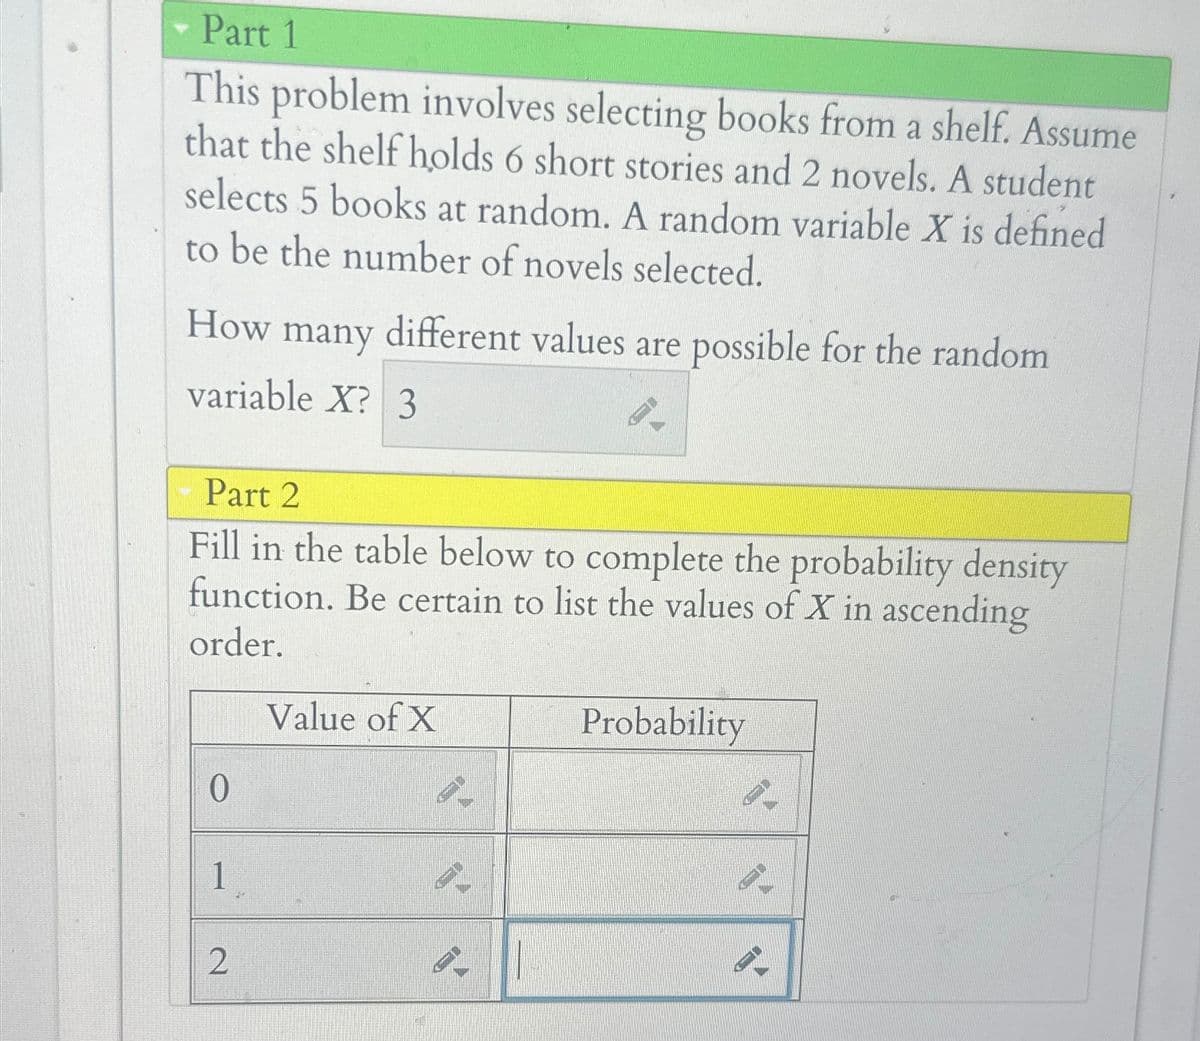 Part 1
This problem involves selecting books from a shelf. Assume
that the shelf holds 6 short stories and 2 novels. A student
selects 5 books at random. A random variable X is defined
to be the number of novels selected.
How many
different values are possible for the random
variable X? 3
Part 2
Fill in the table below to complete the probability density
function. Be certain to list the values of X in ascending
order.
Value of X
0
1
2
Probability